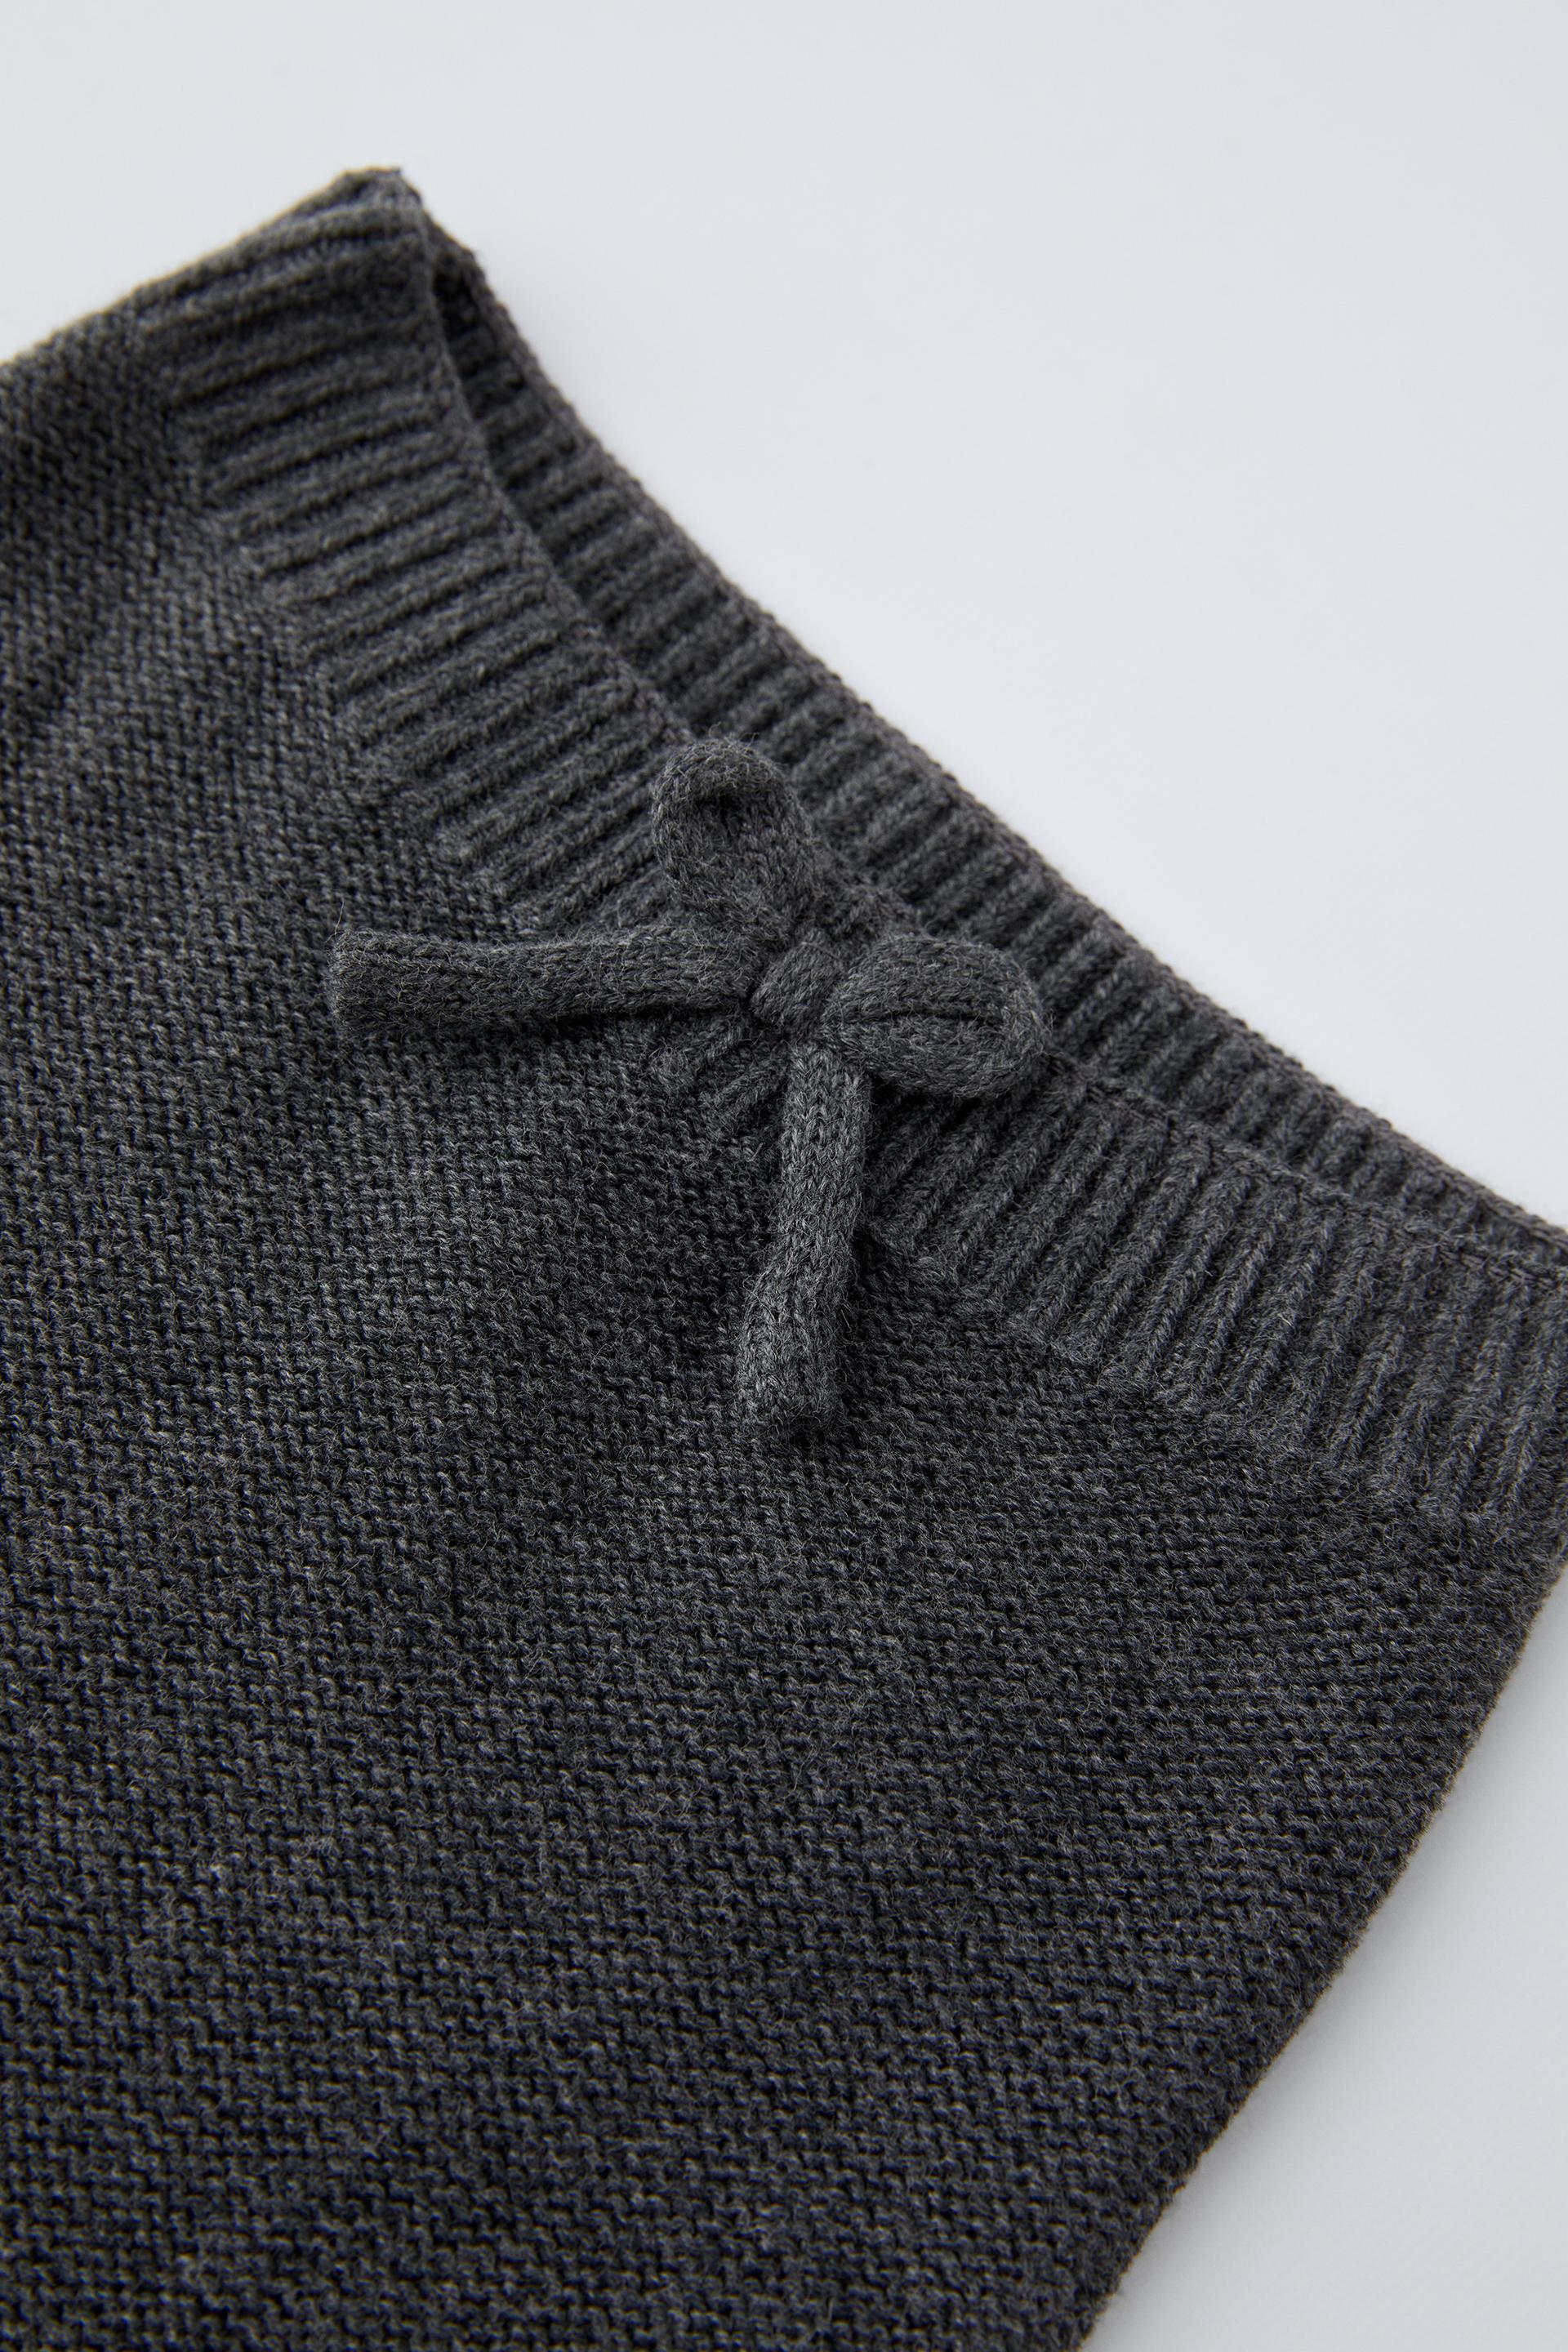 KNIT FOOTED LEGGINGS WITH TIED DETAIL - Anthracite grey